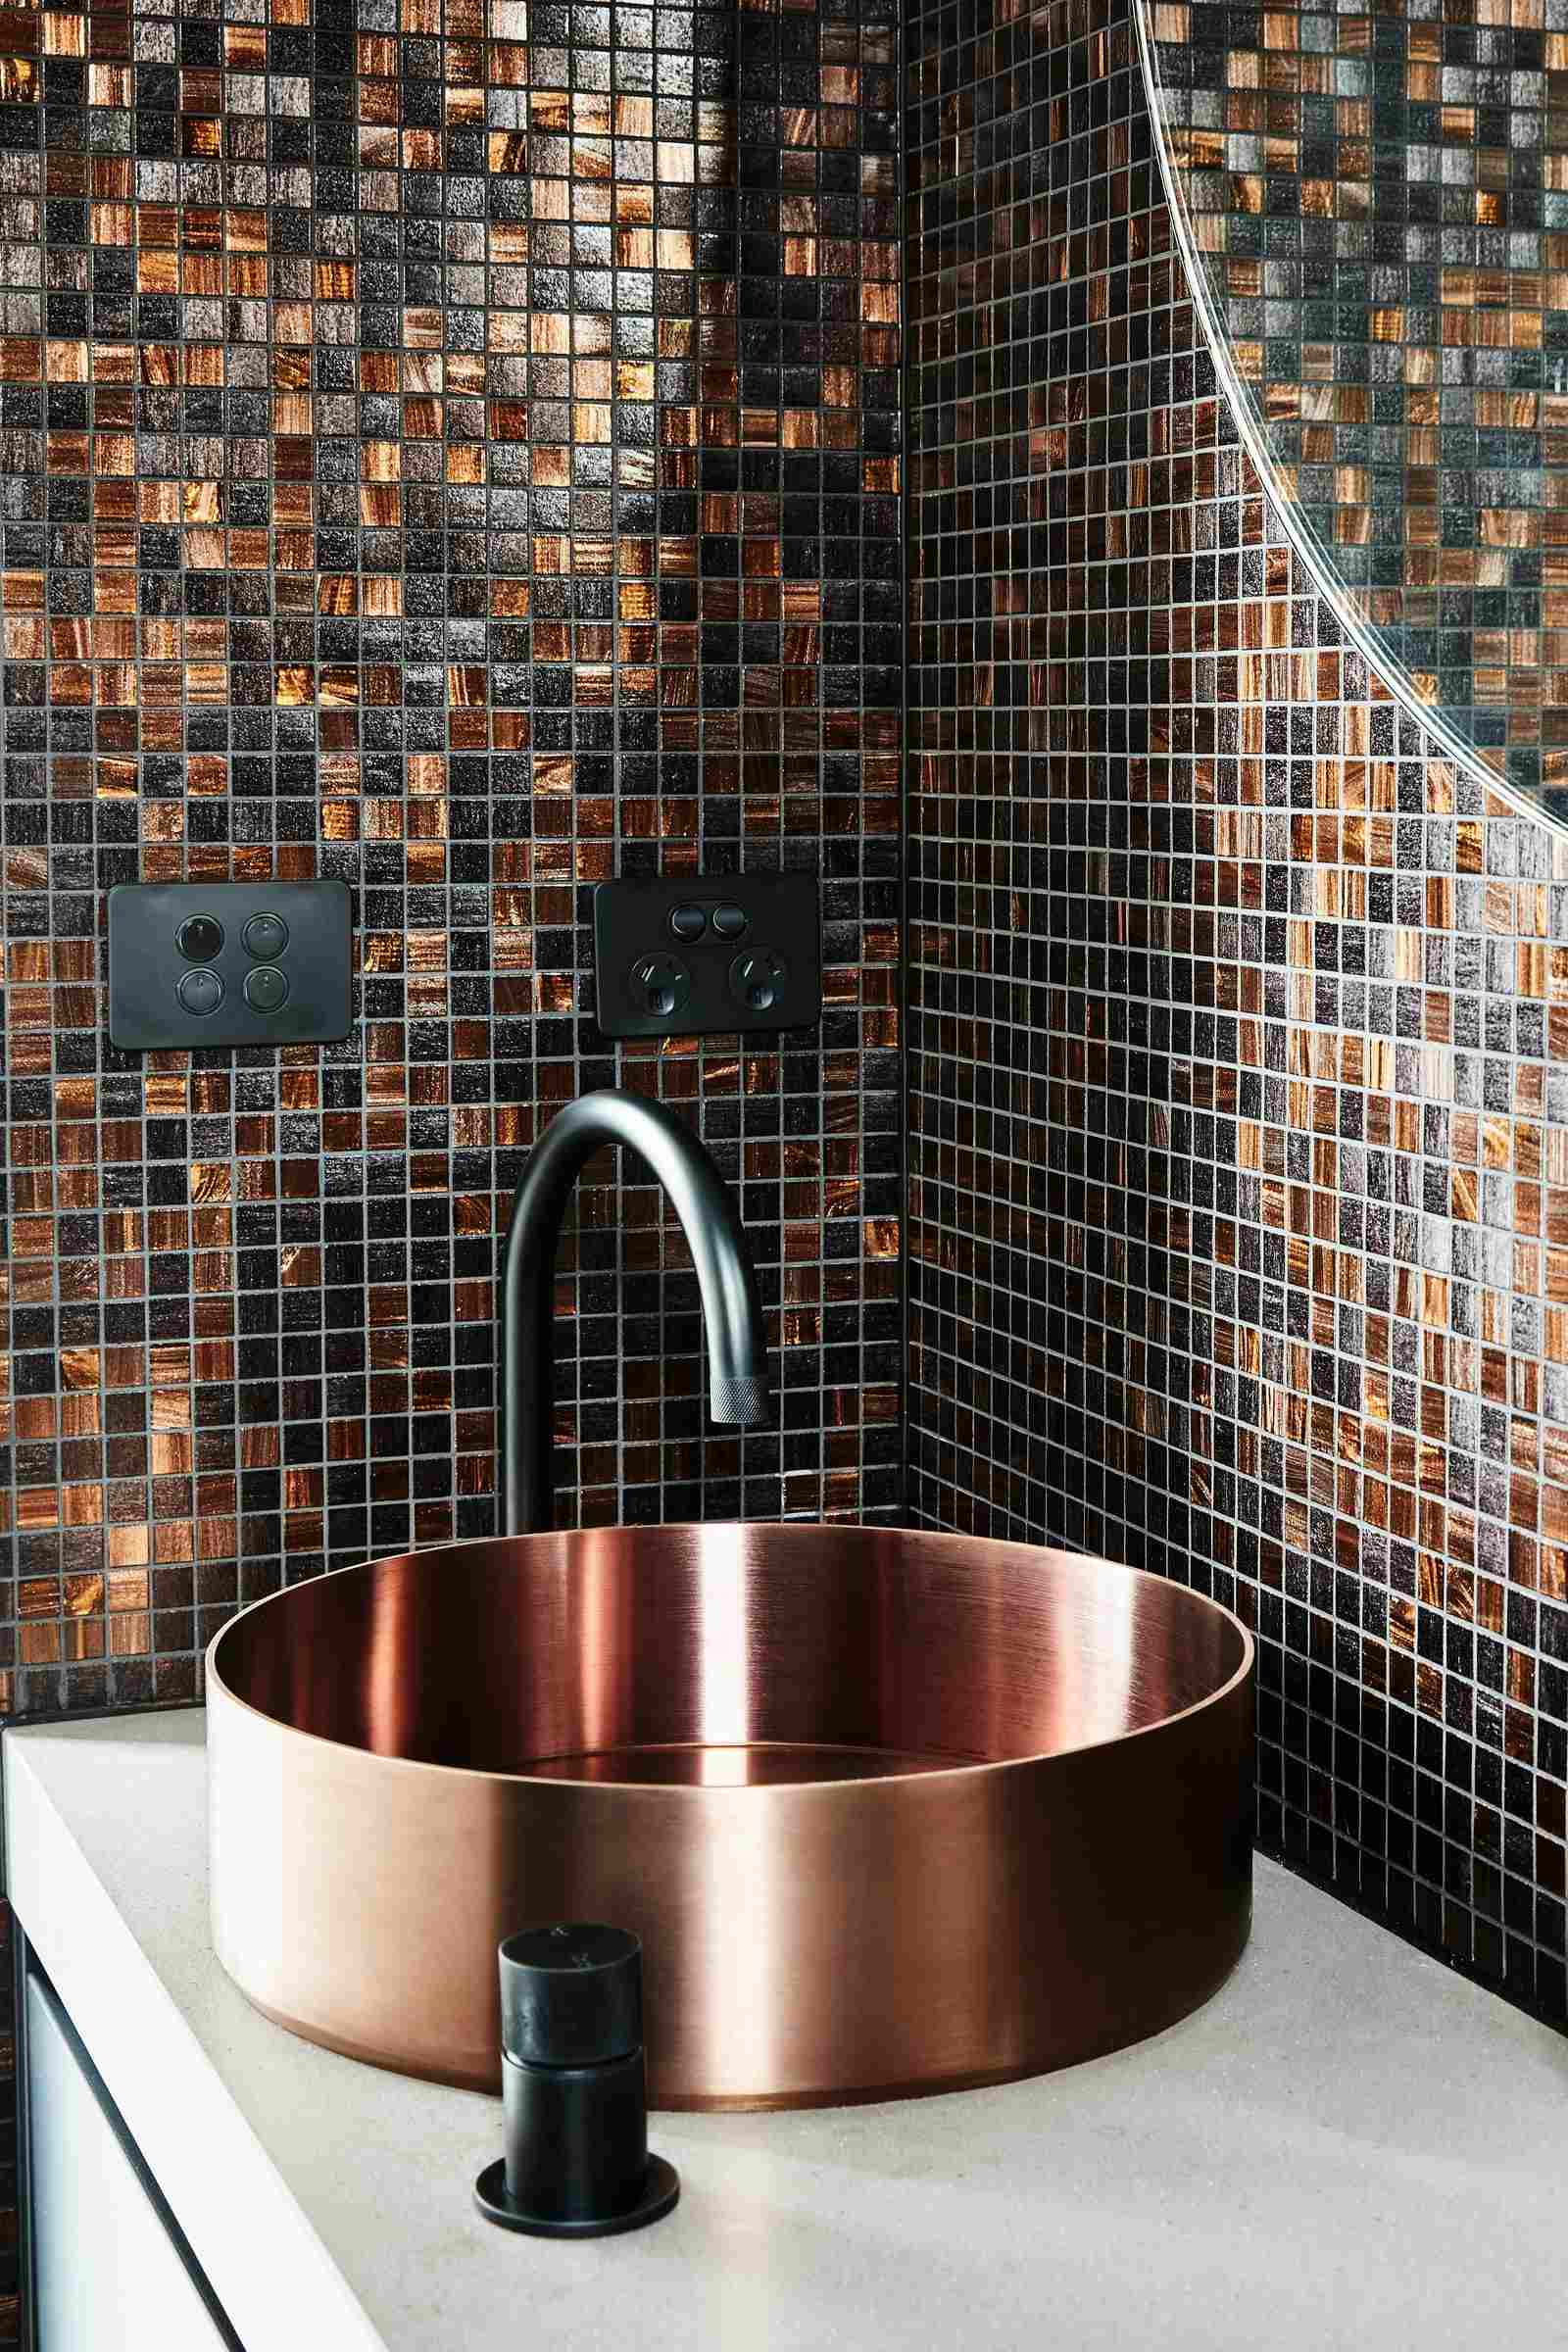 A Par Taps mixer and hob in black styled in a nice bathroom with copper basin, black and copper tile splashback and white bench